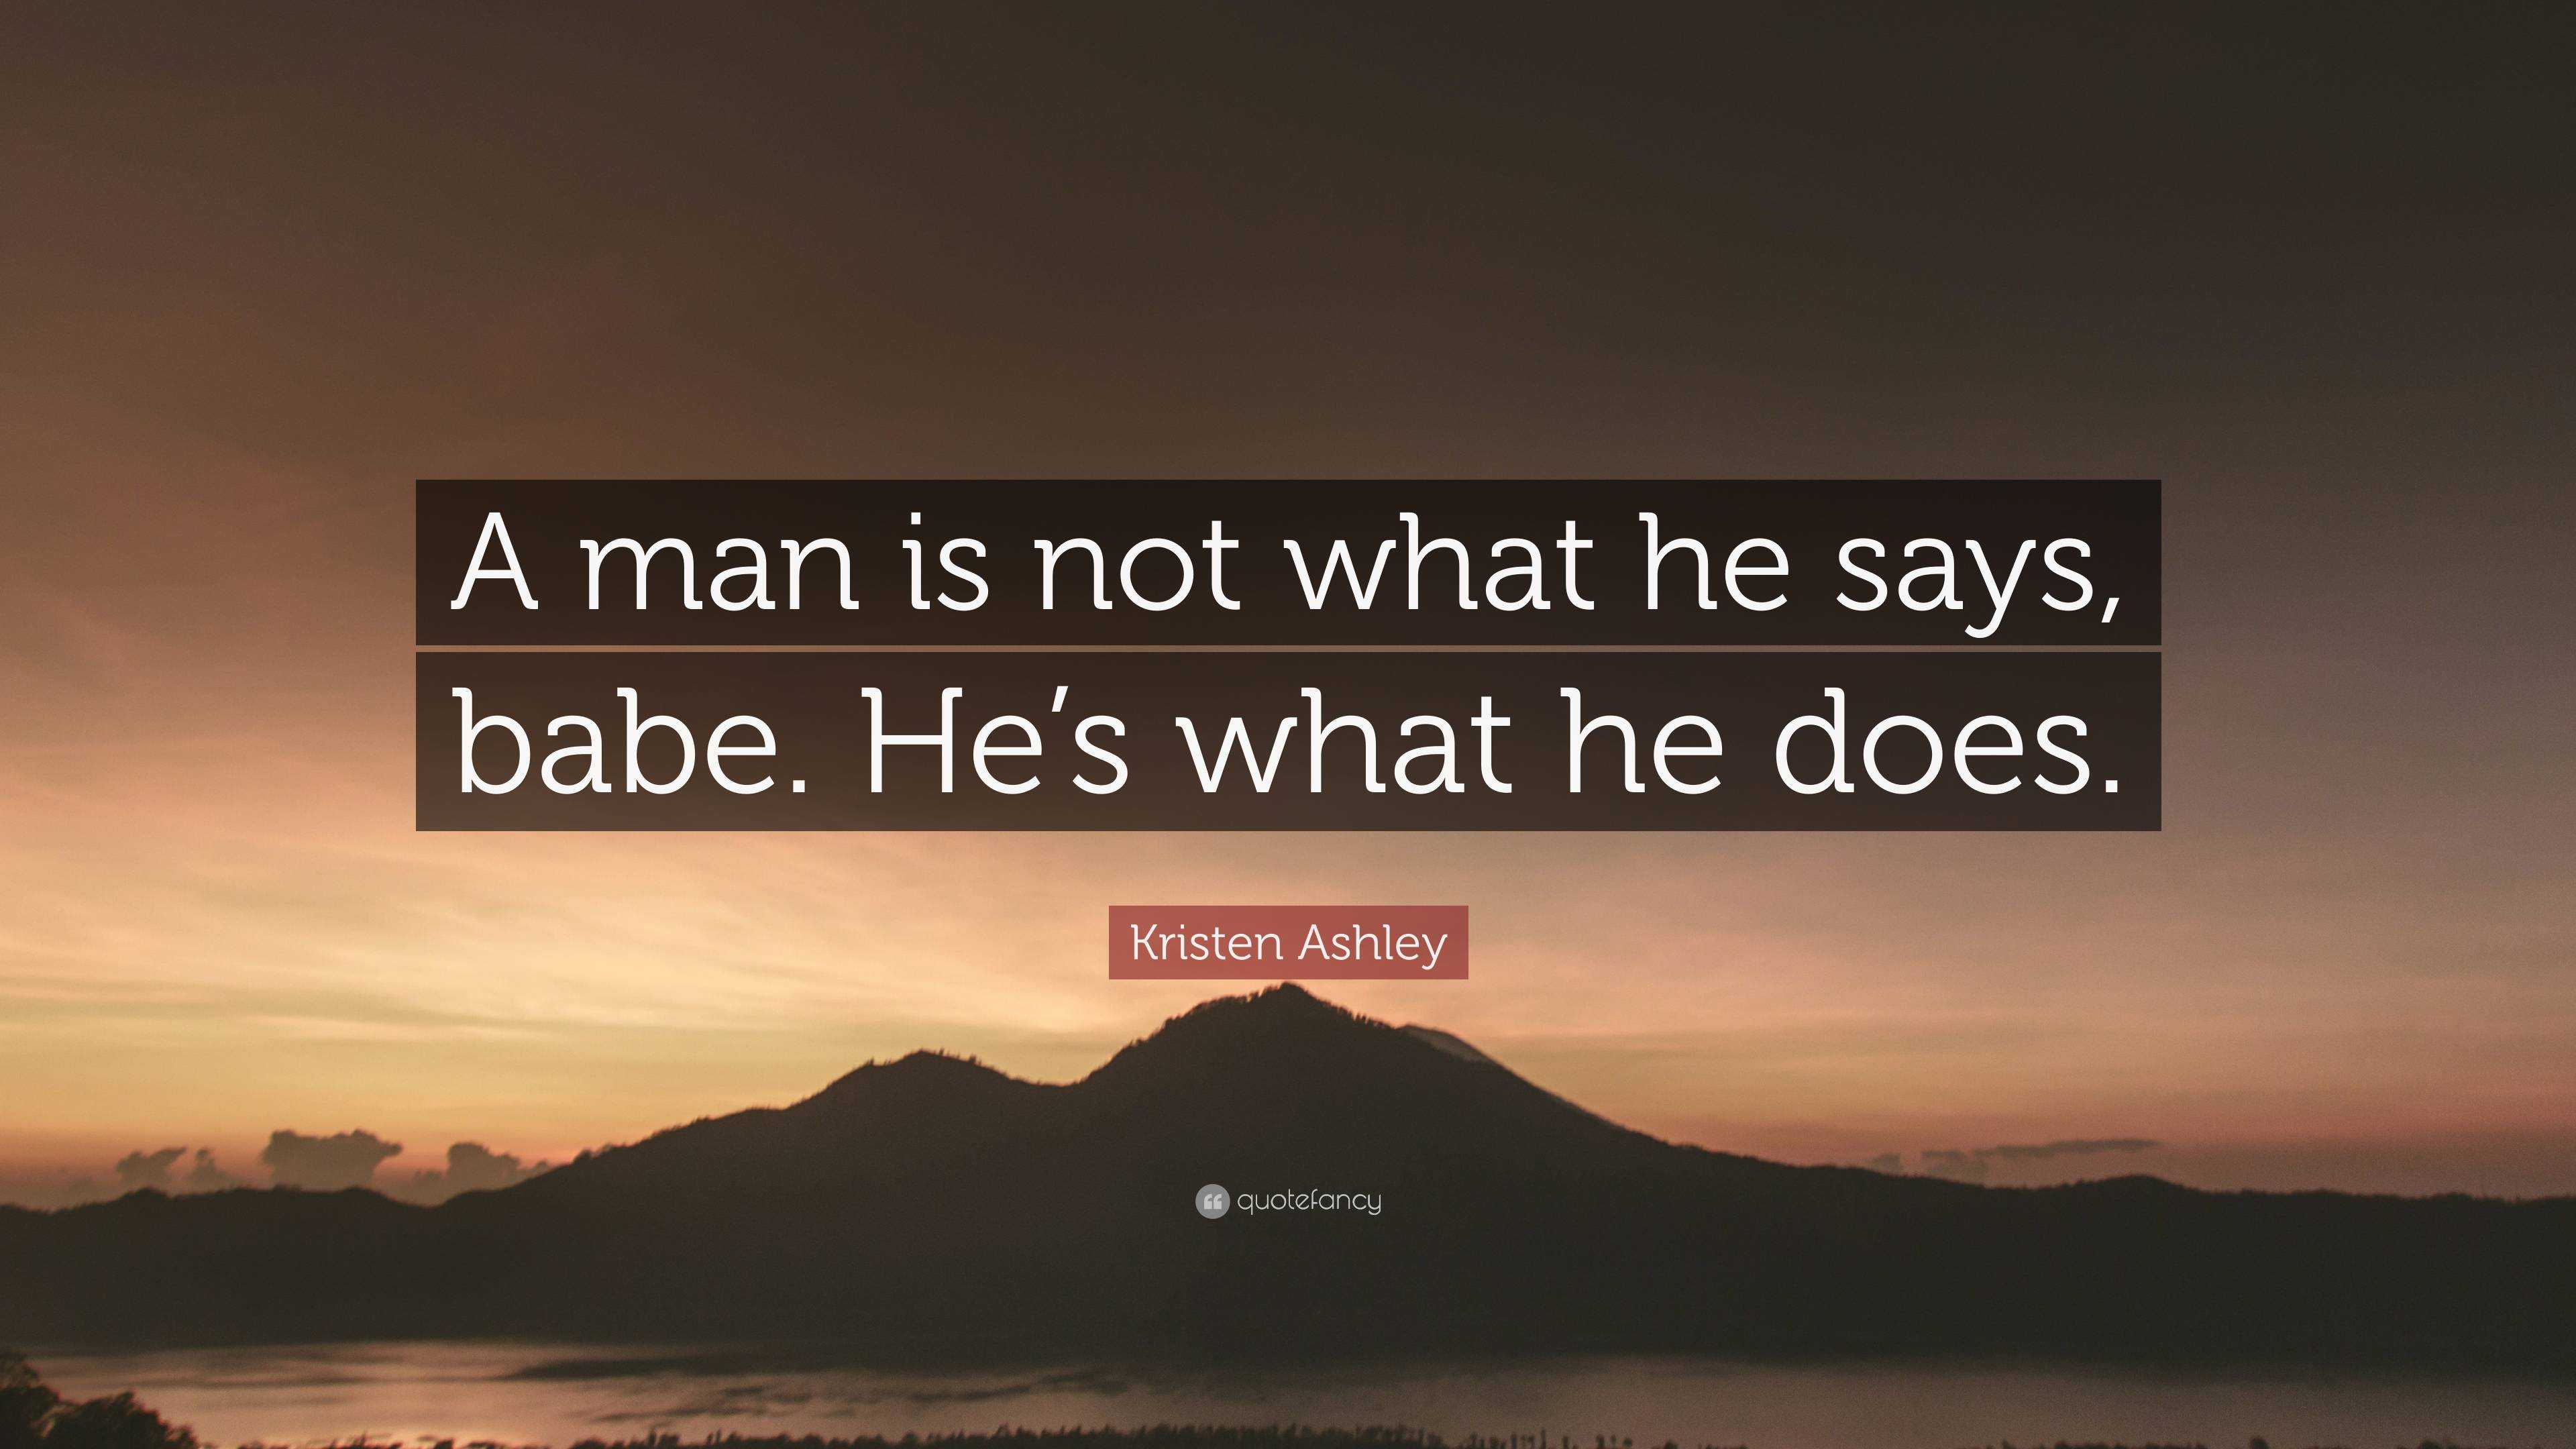 Kristen Ashley Quote: “A man is not what he says, babe. He’s what he does.”